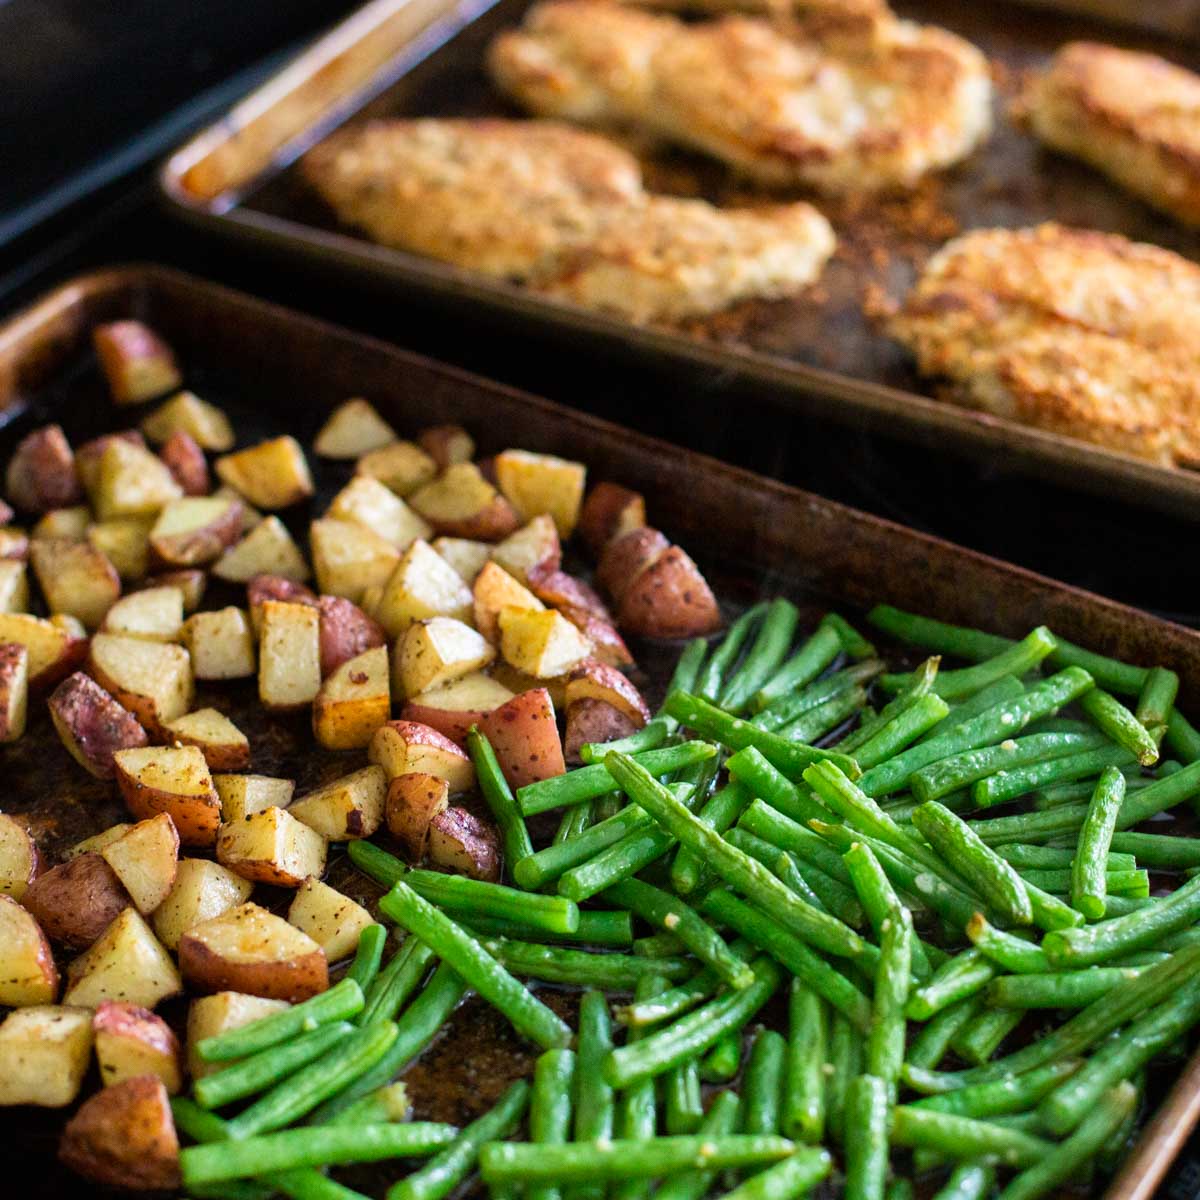 Two sheet pans hold roasted green beans, roasted potatoes, and a breaded sheet pan chicken cutlet.